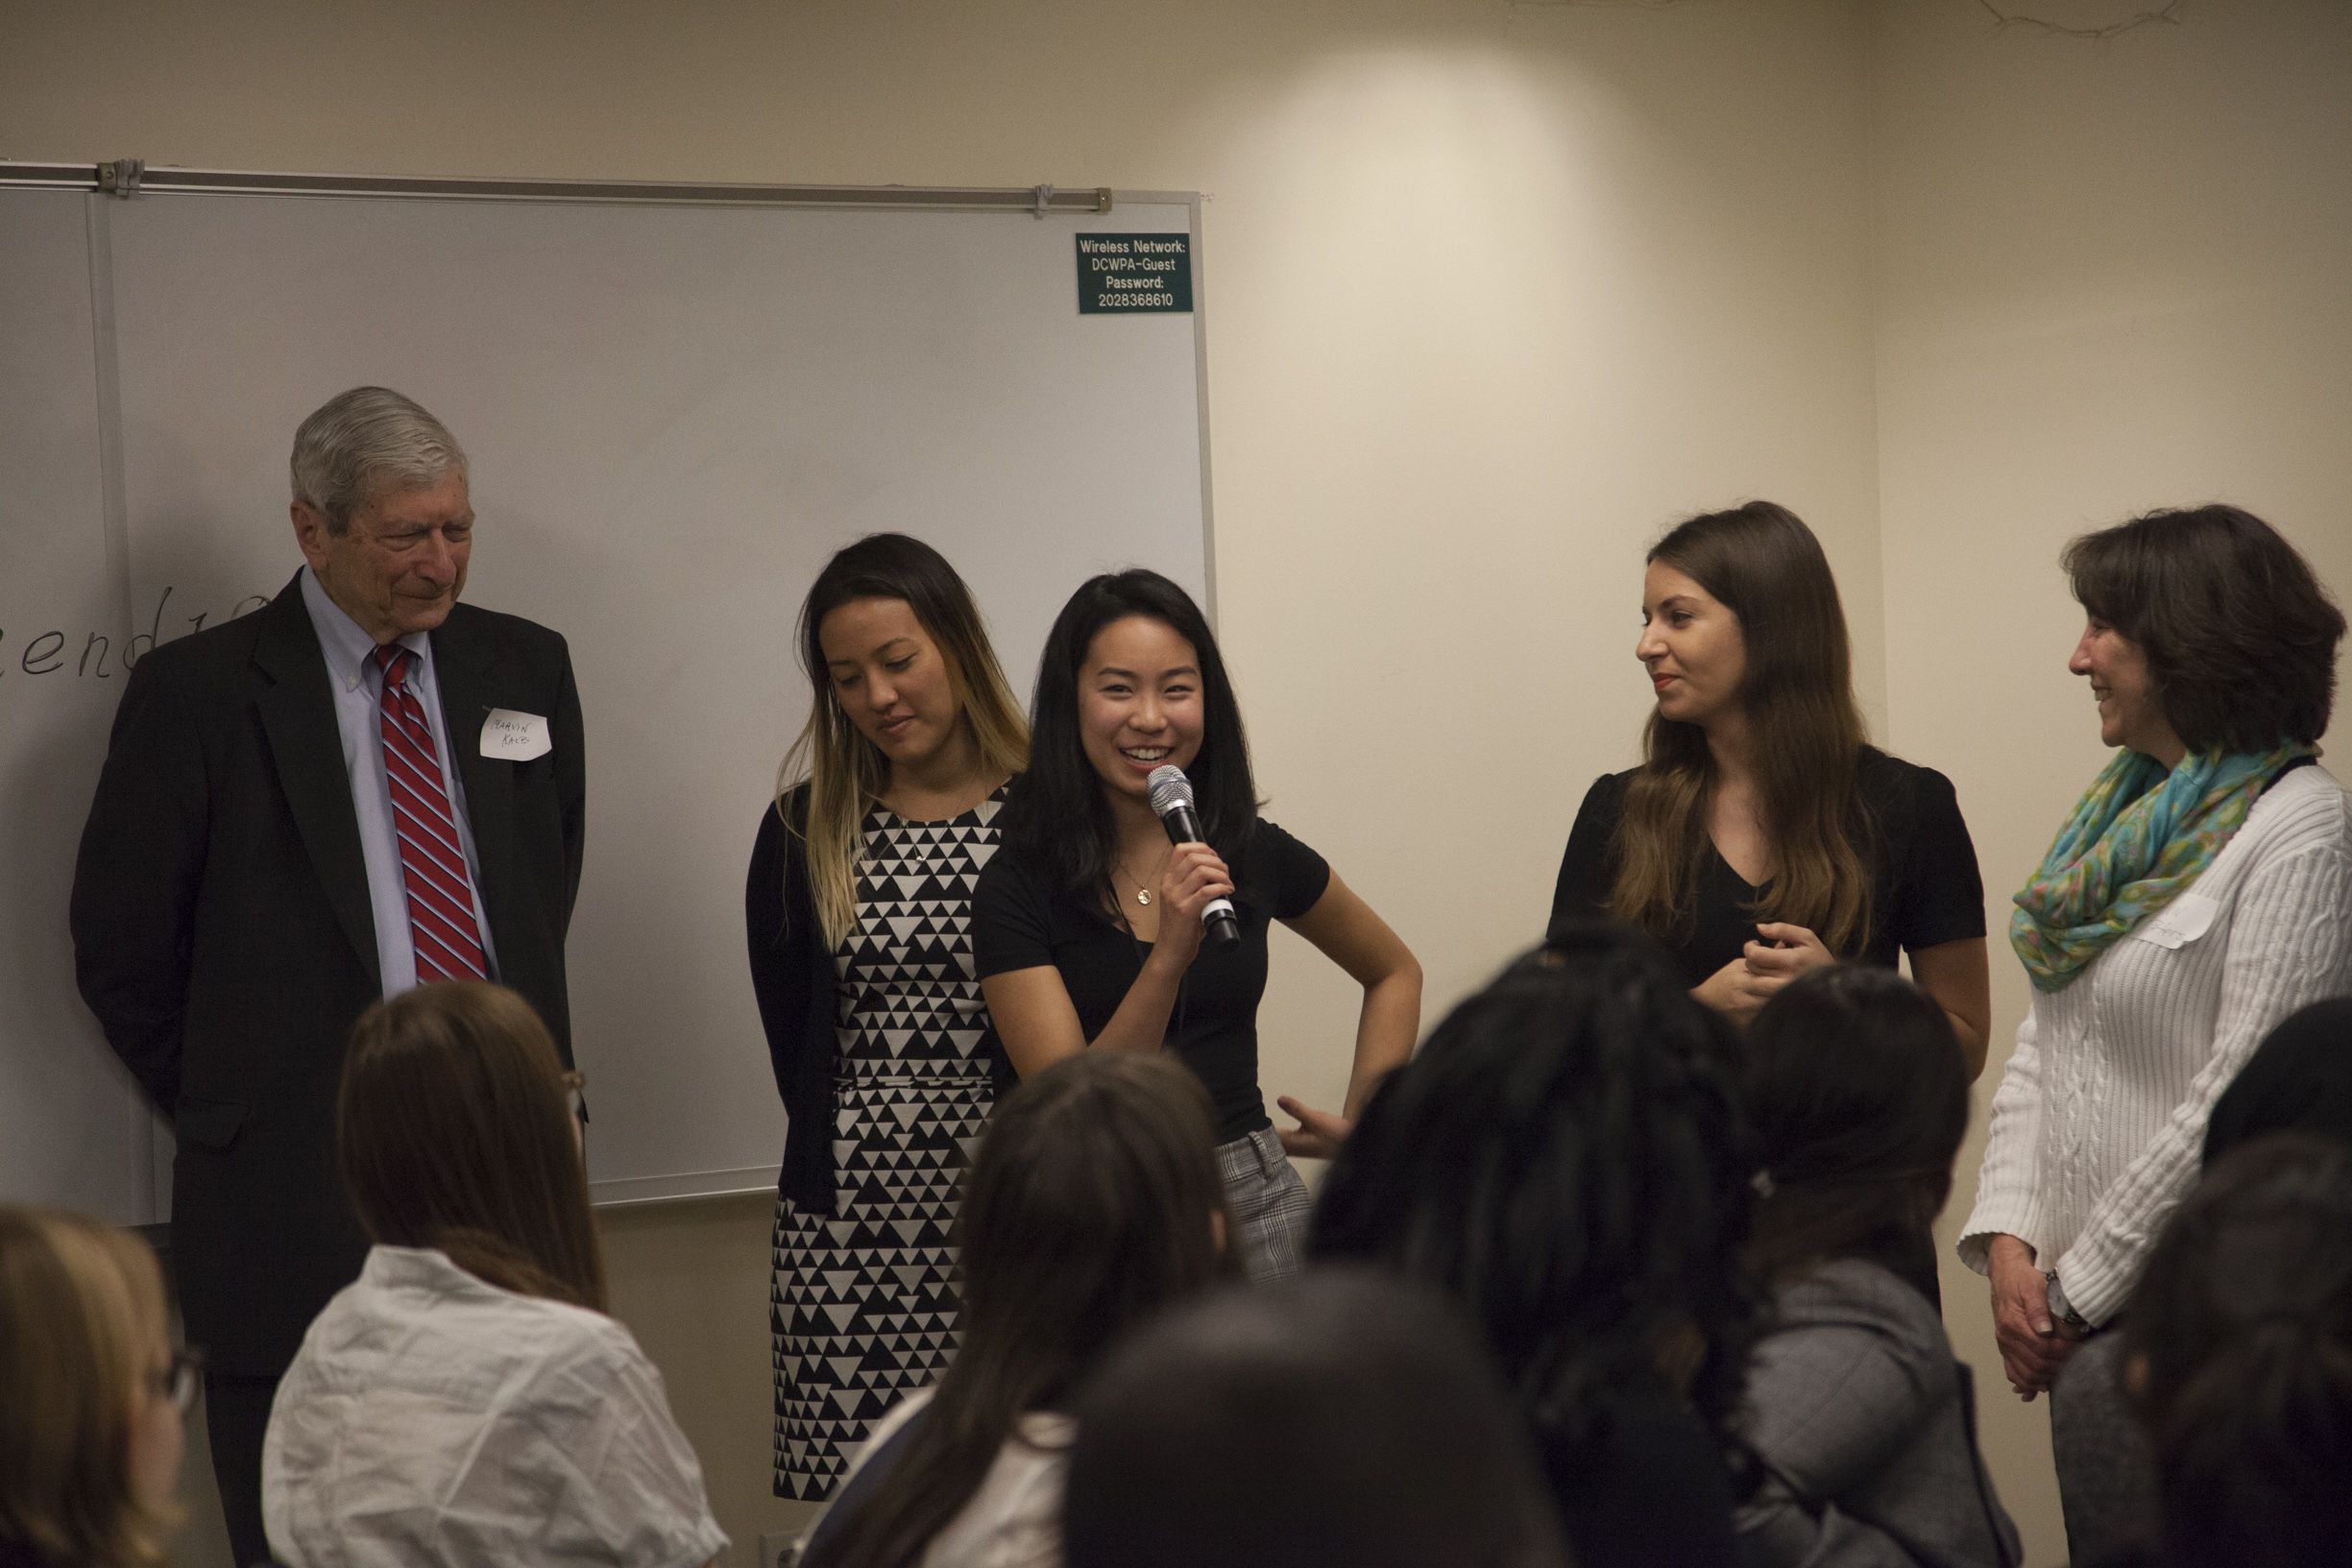 Pulitzer Center intern Ashley Zhang introduces herself to student fellows. Behind her are Pulitzer Center staff Marvin Kalb, Julia Kelmers, Hannah Berk, and Ann Peters. Image by Jin Ding. United States, 2018.